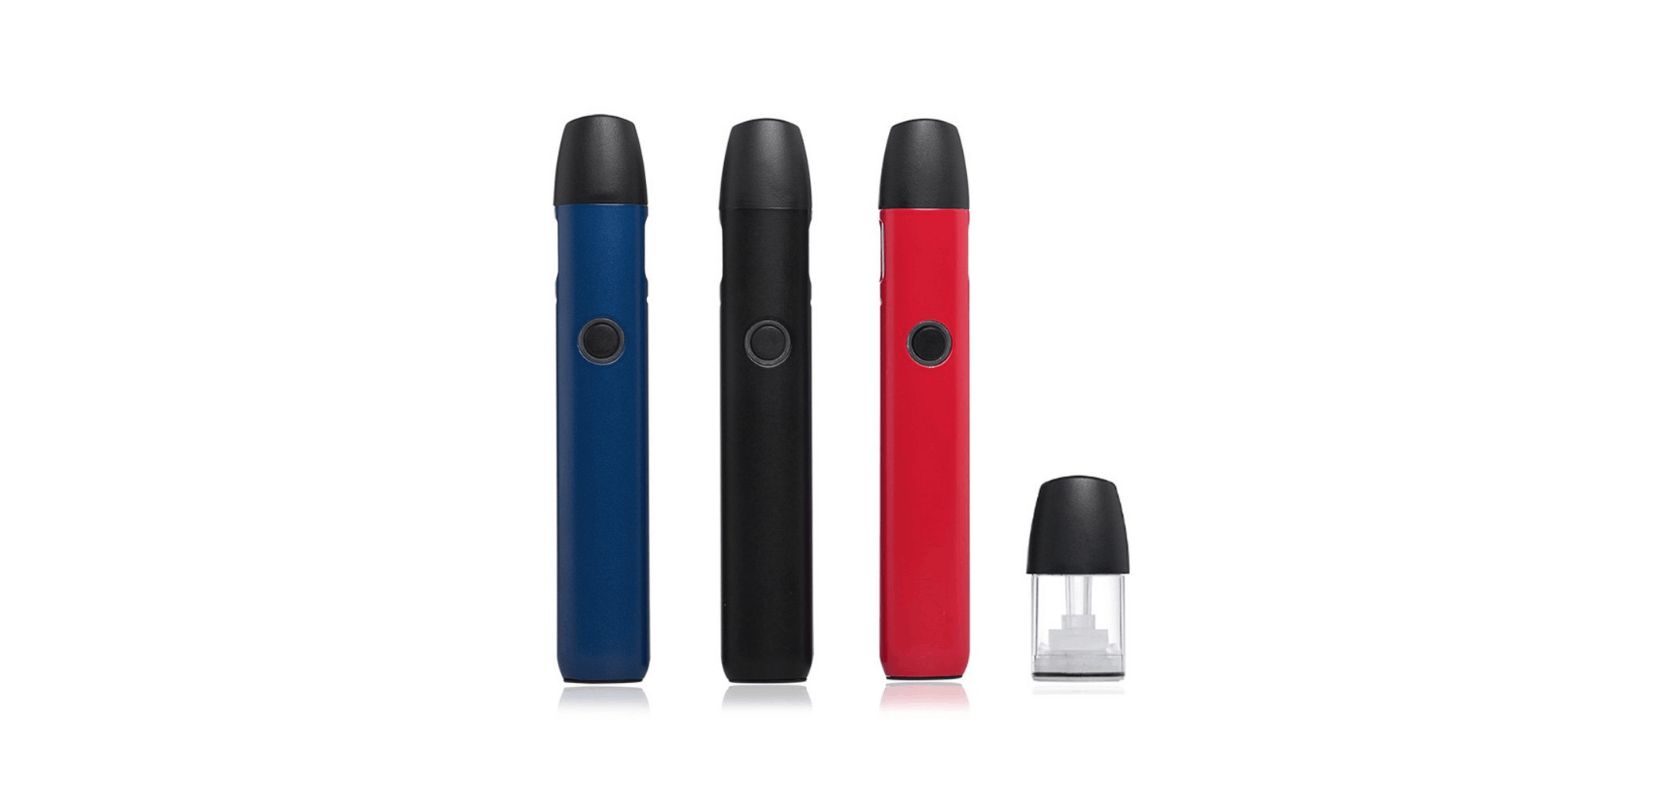 A THC vape pen is an electronic device that heats a cannabis concentrate to produce vapour you inhale. This vapour contains cannabinoids, terpenes and other cannabis compounds. 